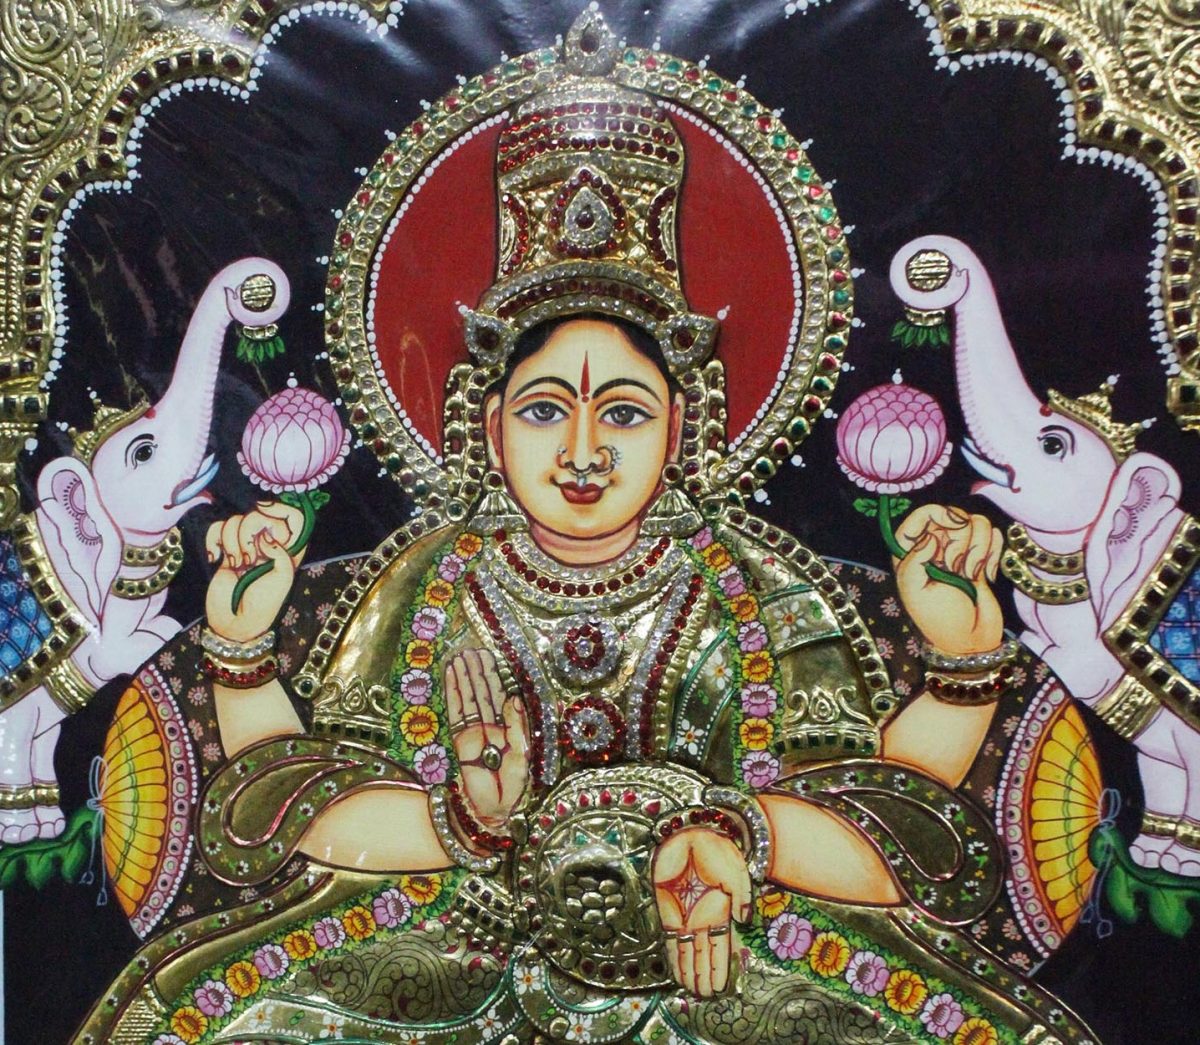 Hindu goddess done in Tanjore painting style by V. Panneer Selvam. This traditional painting style generally portrays Hindu gods, saints, and stories from mythology. (Venus Upadhayaya/Epoch Times)